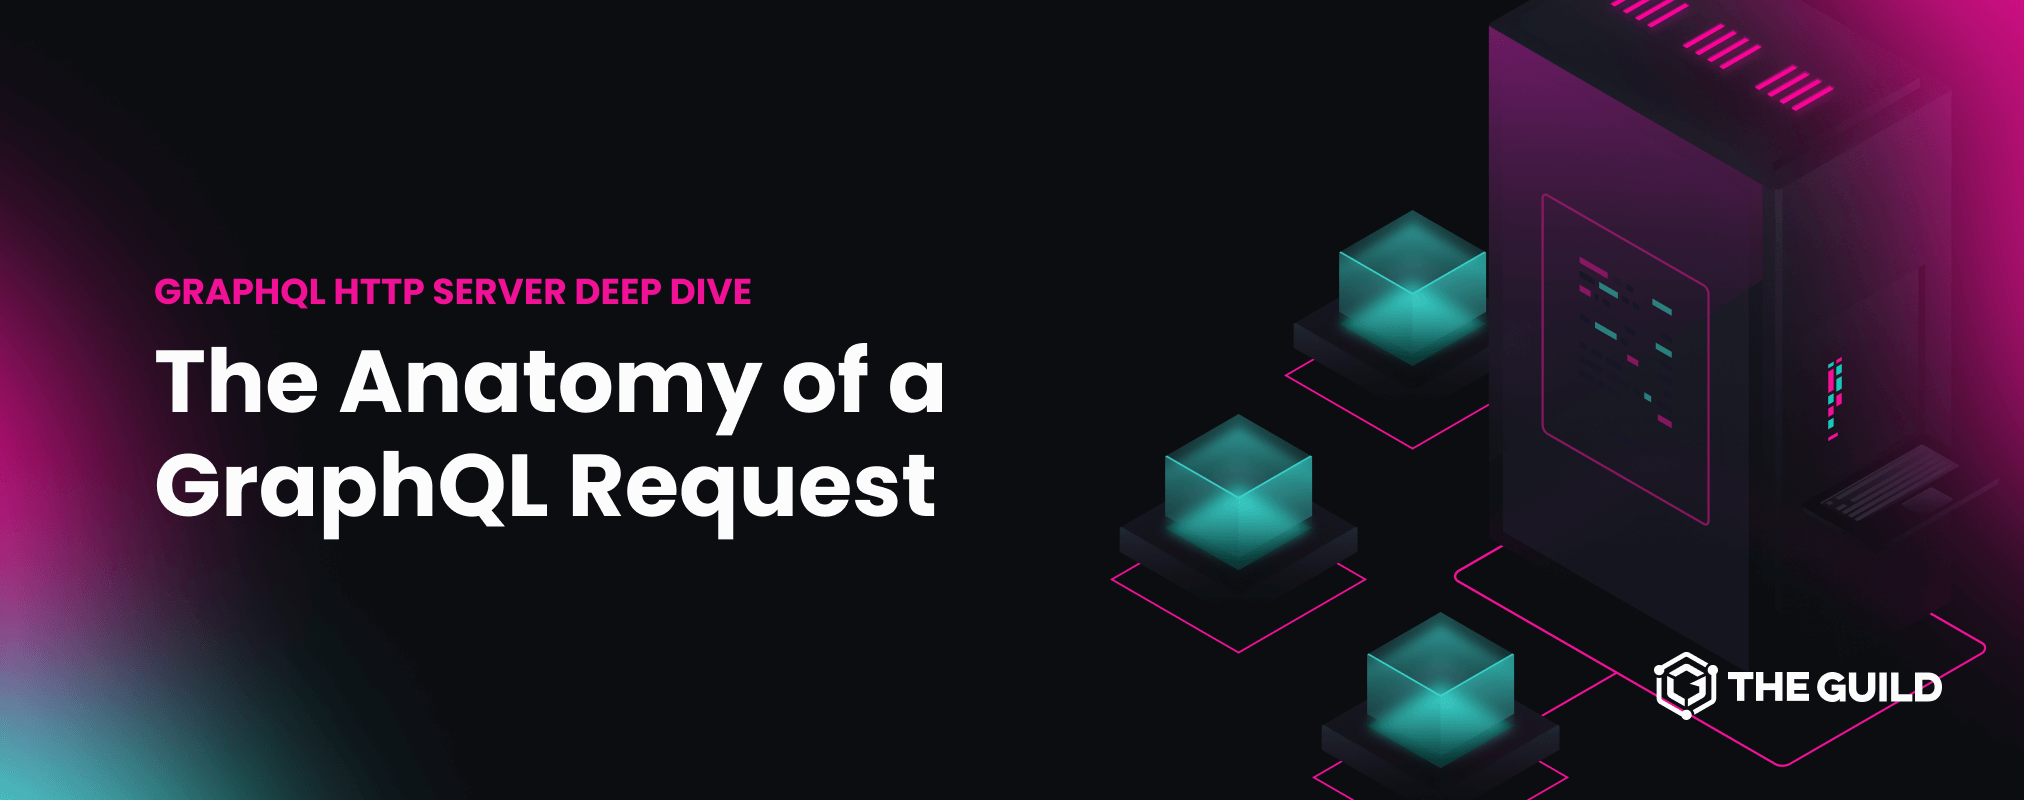 The Anatomy of a GraphQL Request - The Guild Blog